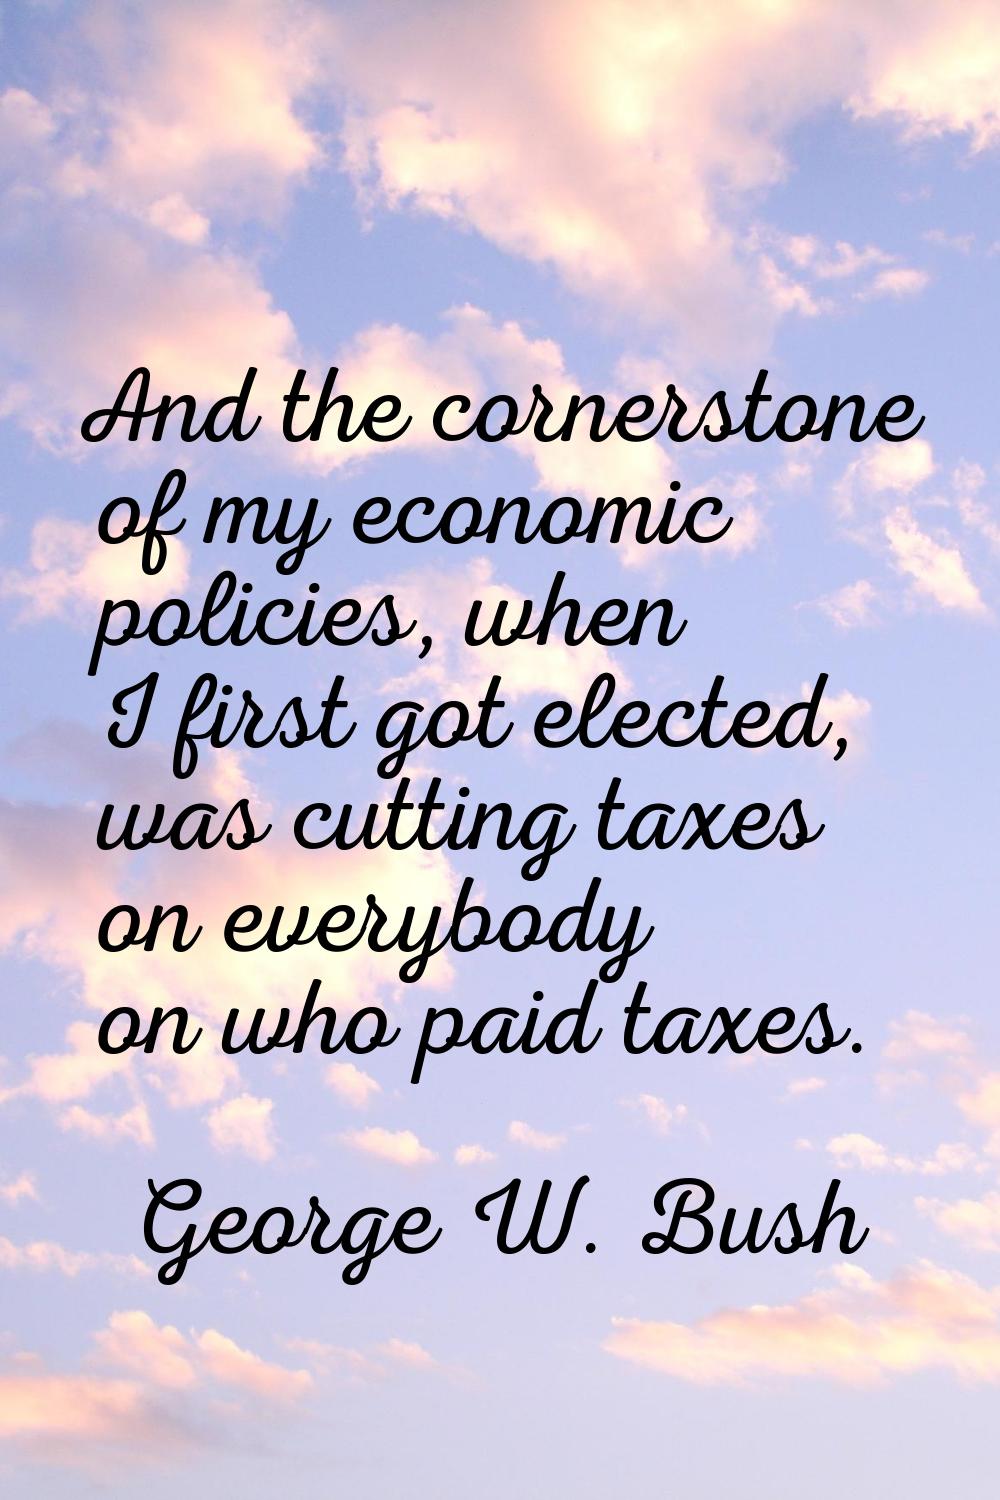 And the cornerstone of my economic policies, when I first got elected, was cutting taxes on everybo